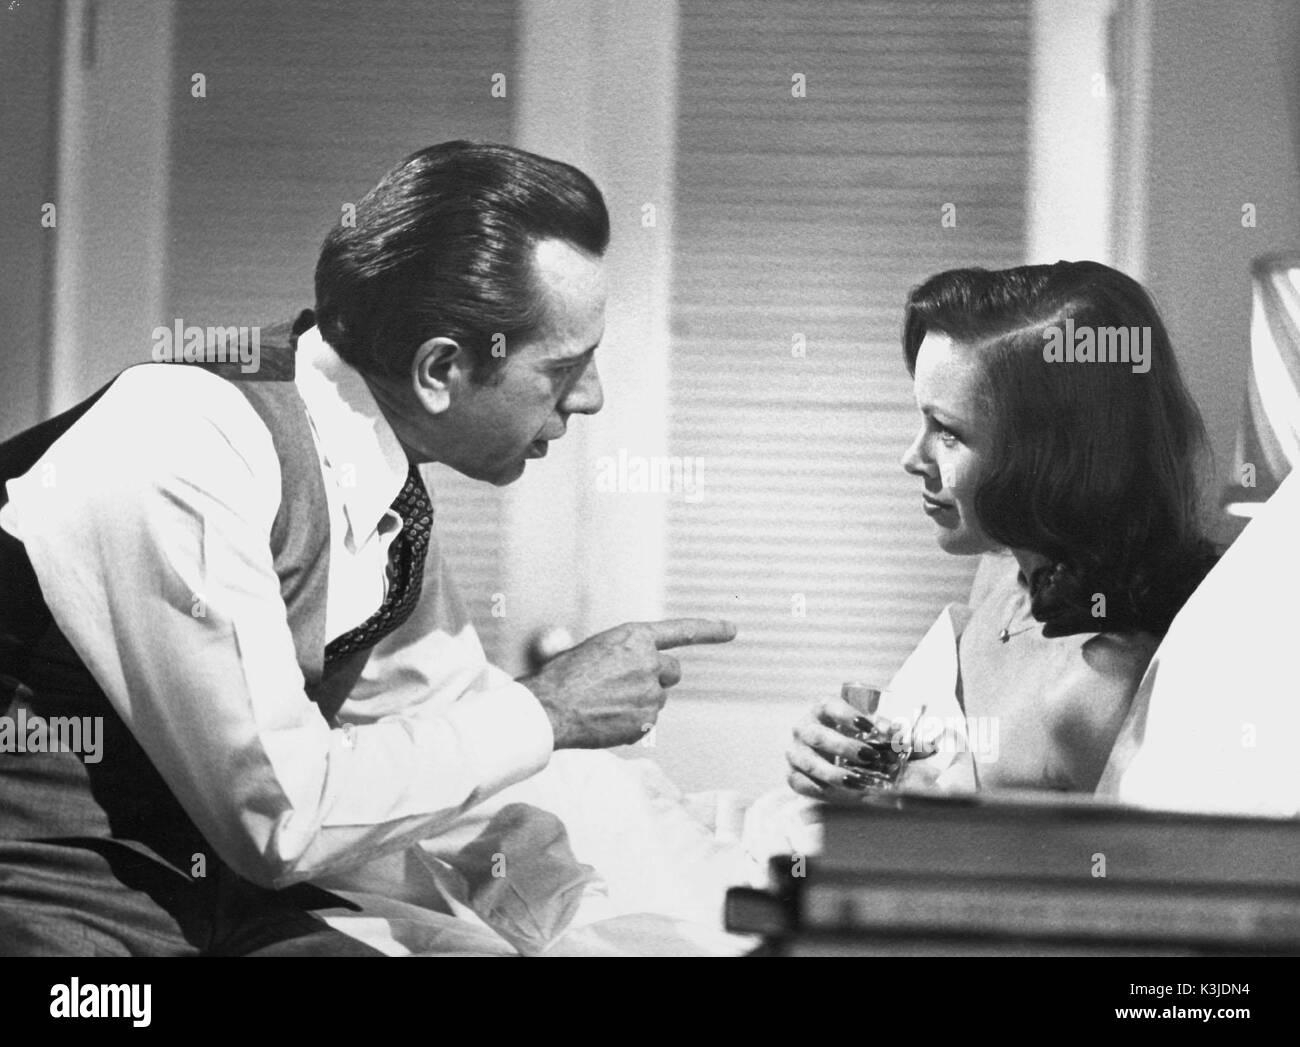 THE MAN WITH BOGART'S FACE [US 1980] ROBERT SACCHI, SYBIL DANNING     Date: 1980 Stock Photo